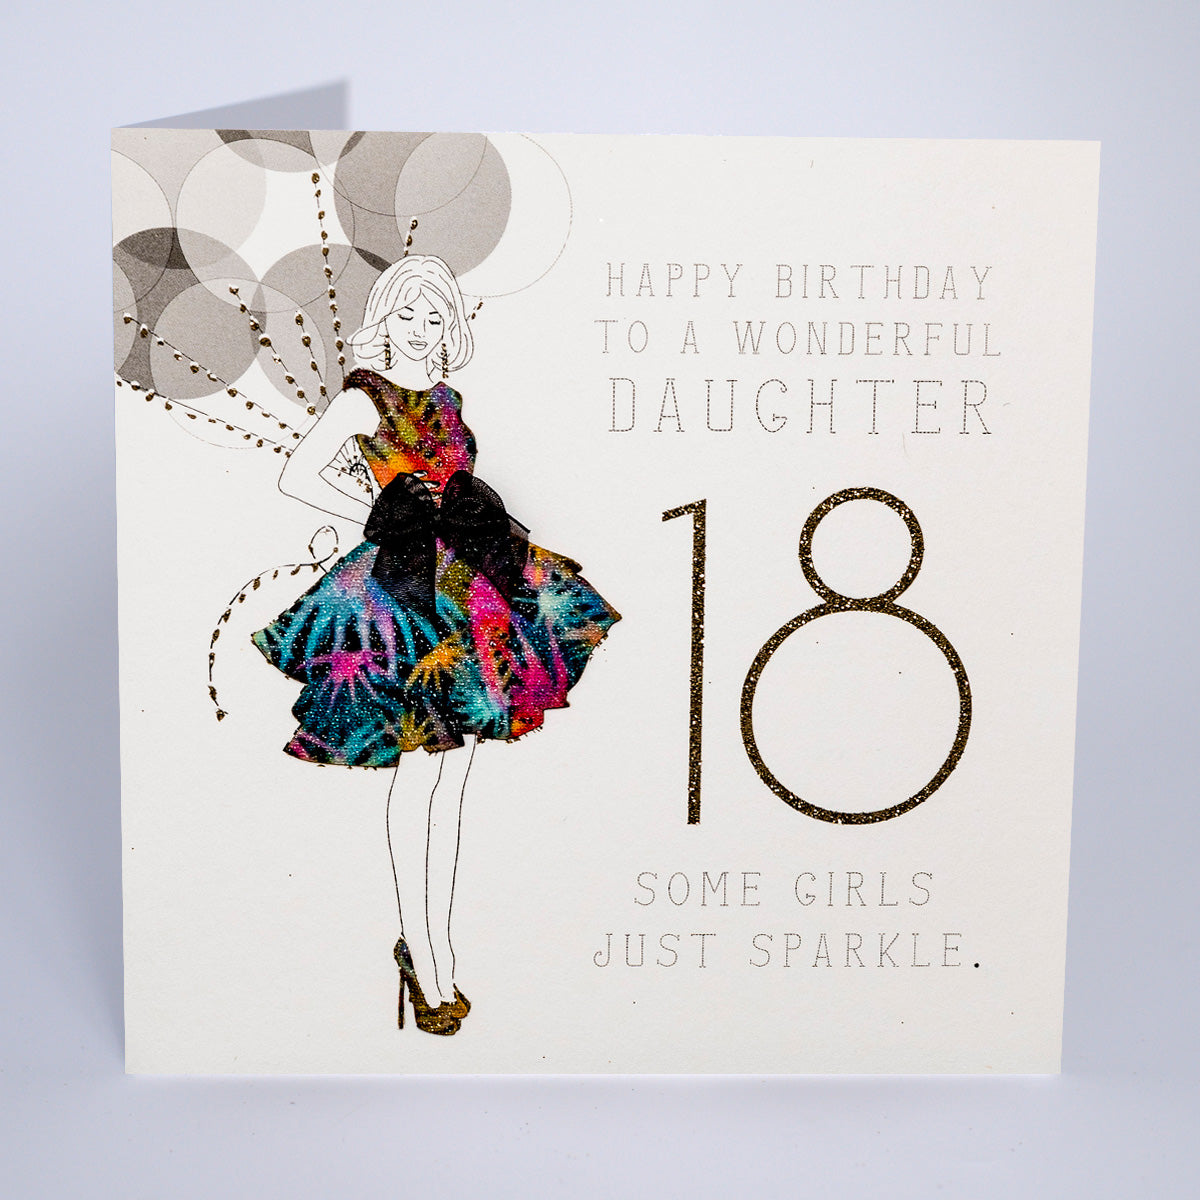 To a Wonderful Daughter - 18 - Some Girls Just Sparkle